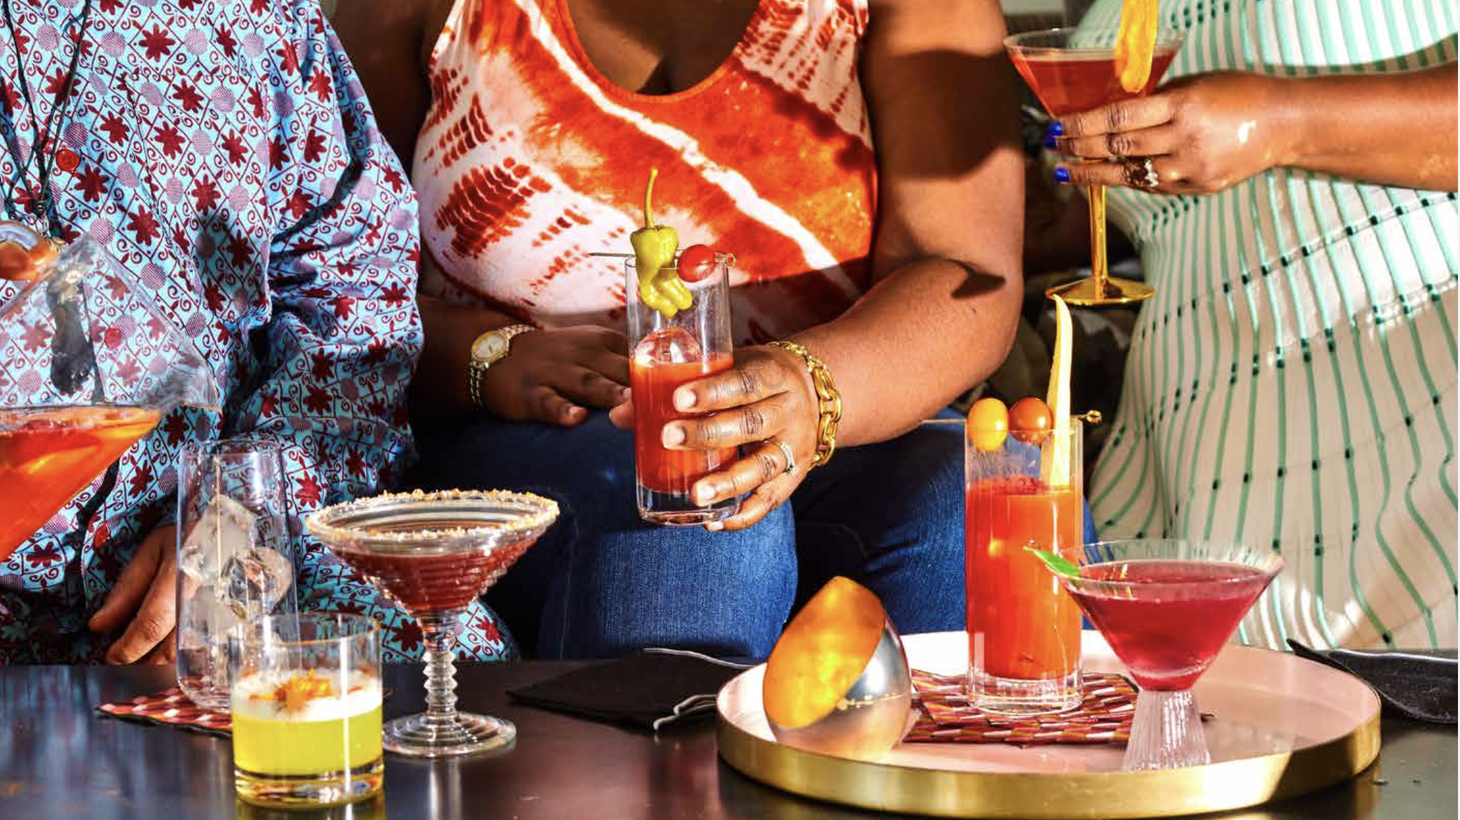 Nicole Taylor’s cookbook “Watermelon and Red Birds” features recipes for Juneteenth celebration drinks known as red drinks.